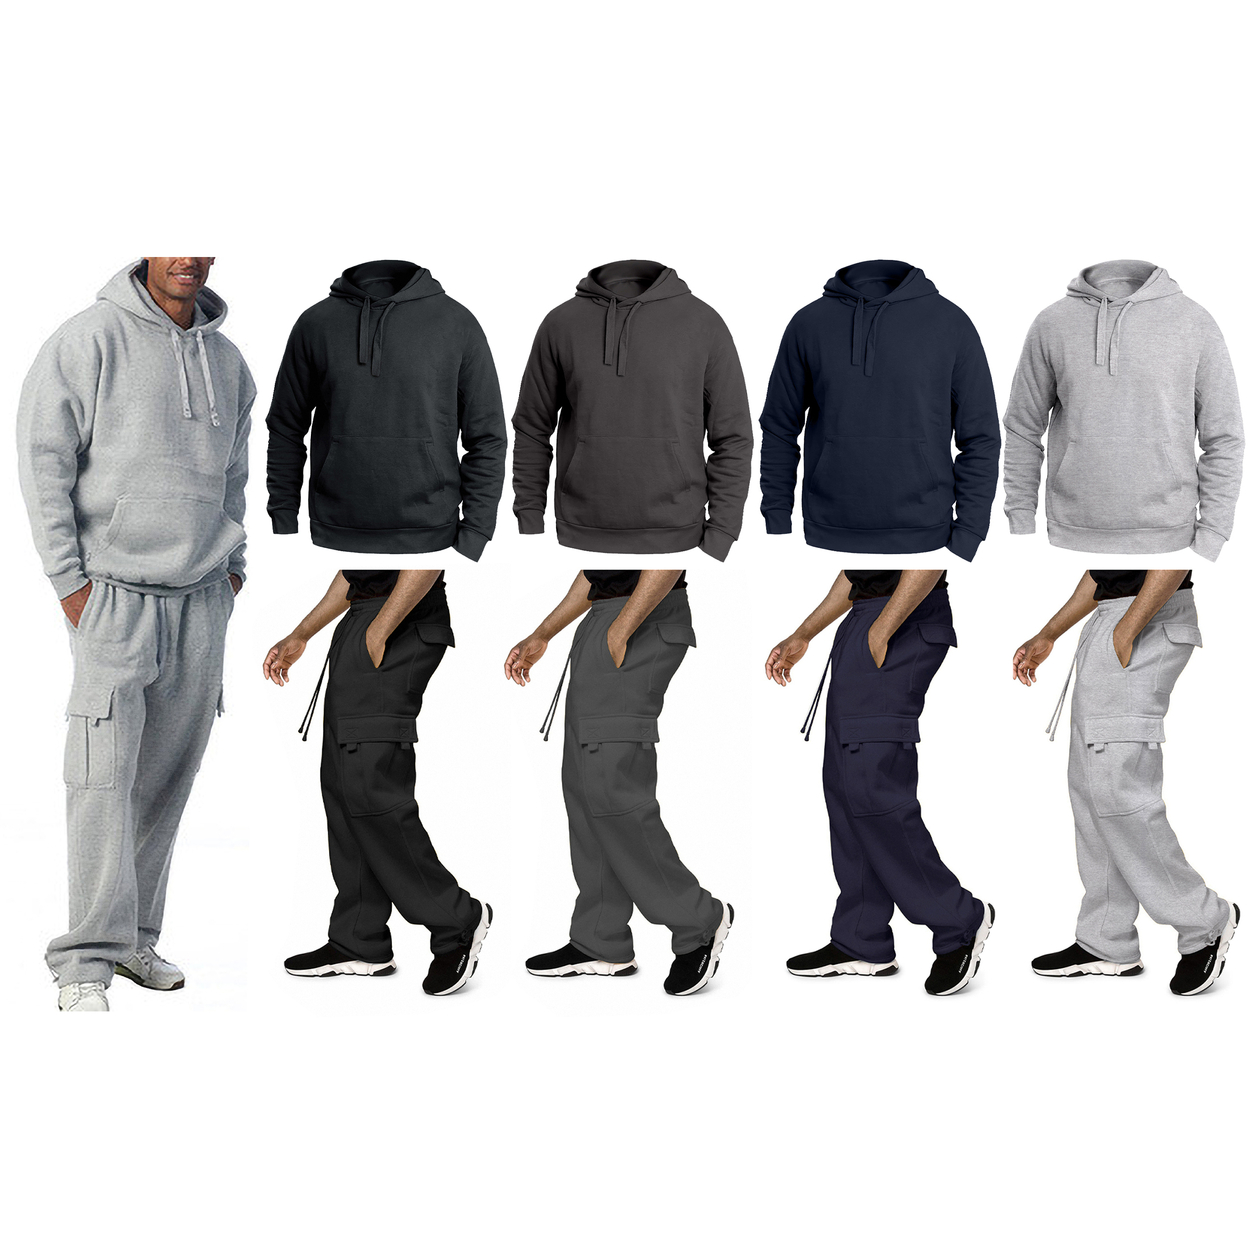 2-Pack: Men's Big & Tall Winter Warm Cozy Athletic Fleece Lined Multi-Pocket Cargo Sweatsuit - Charcoal, Small